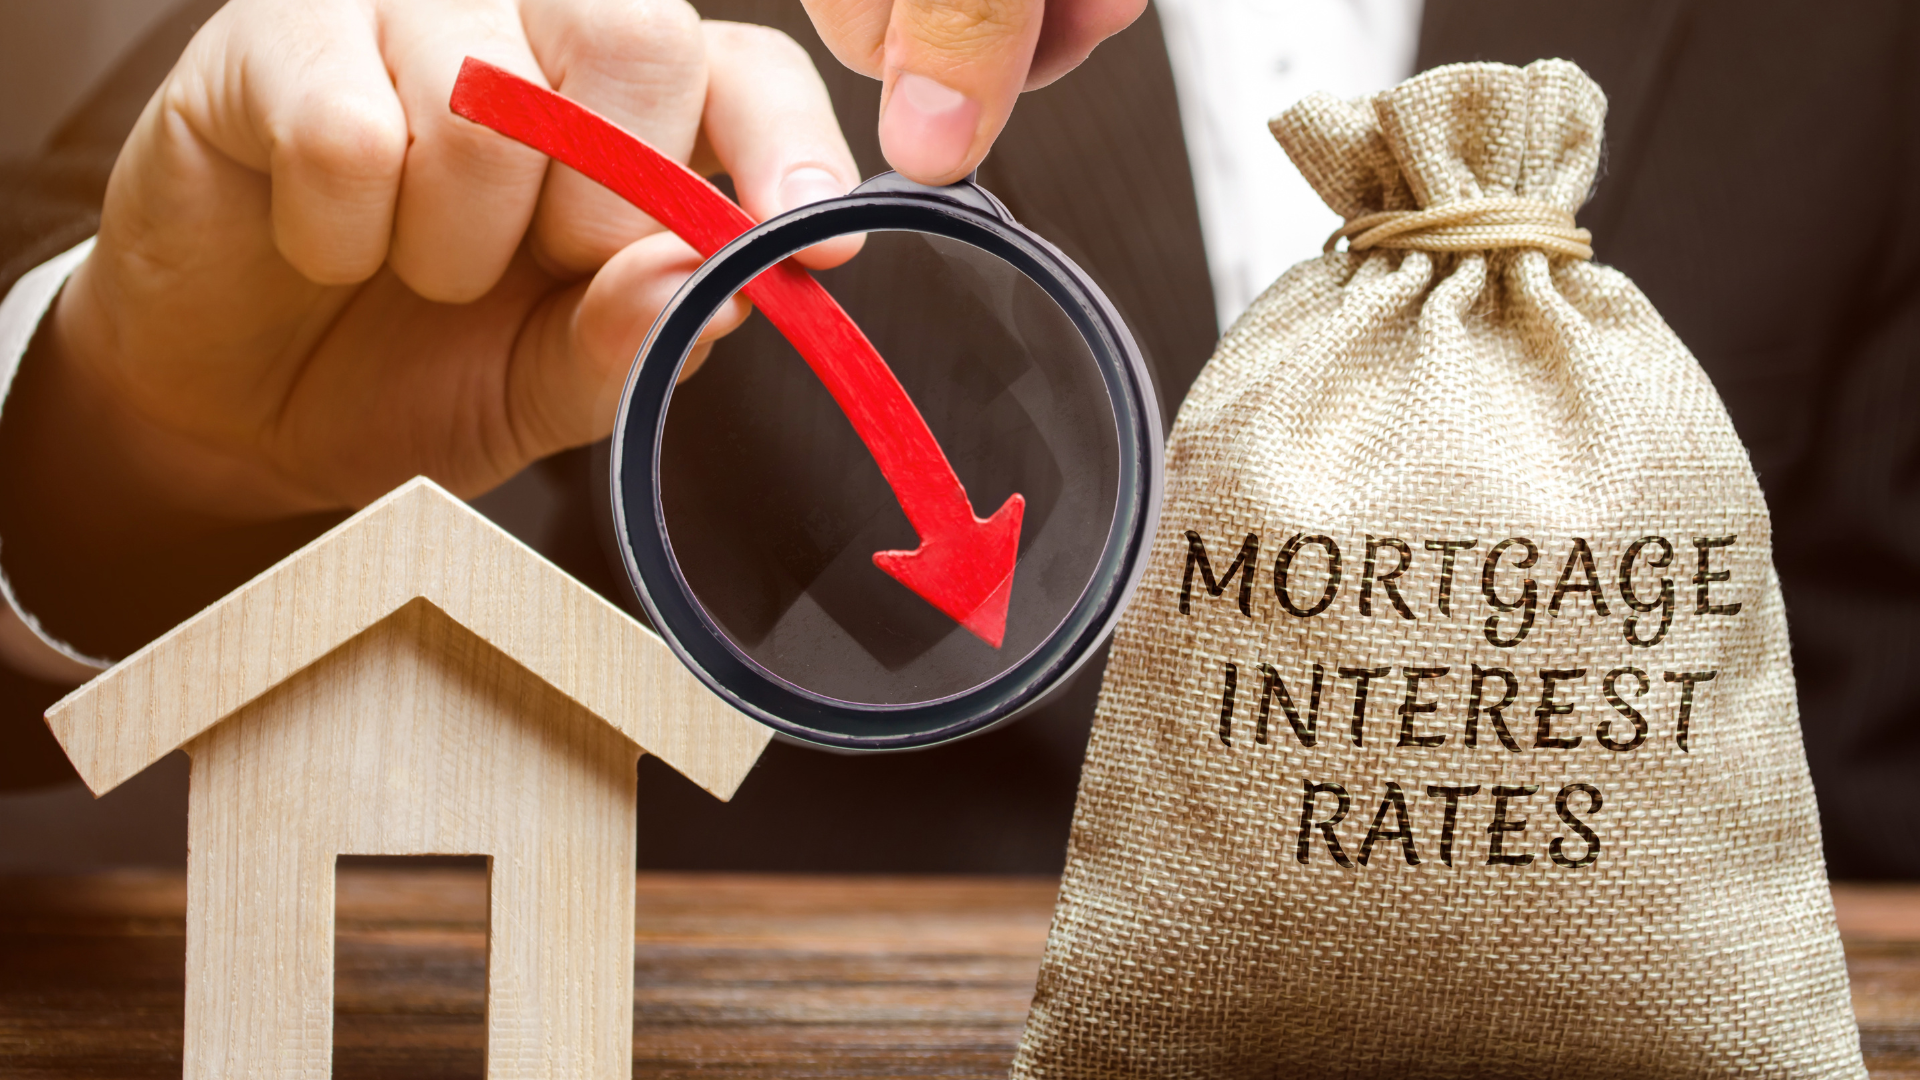 mortgage rates on interest dropping on property investment 